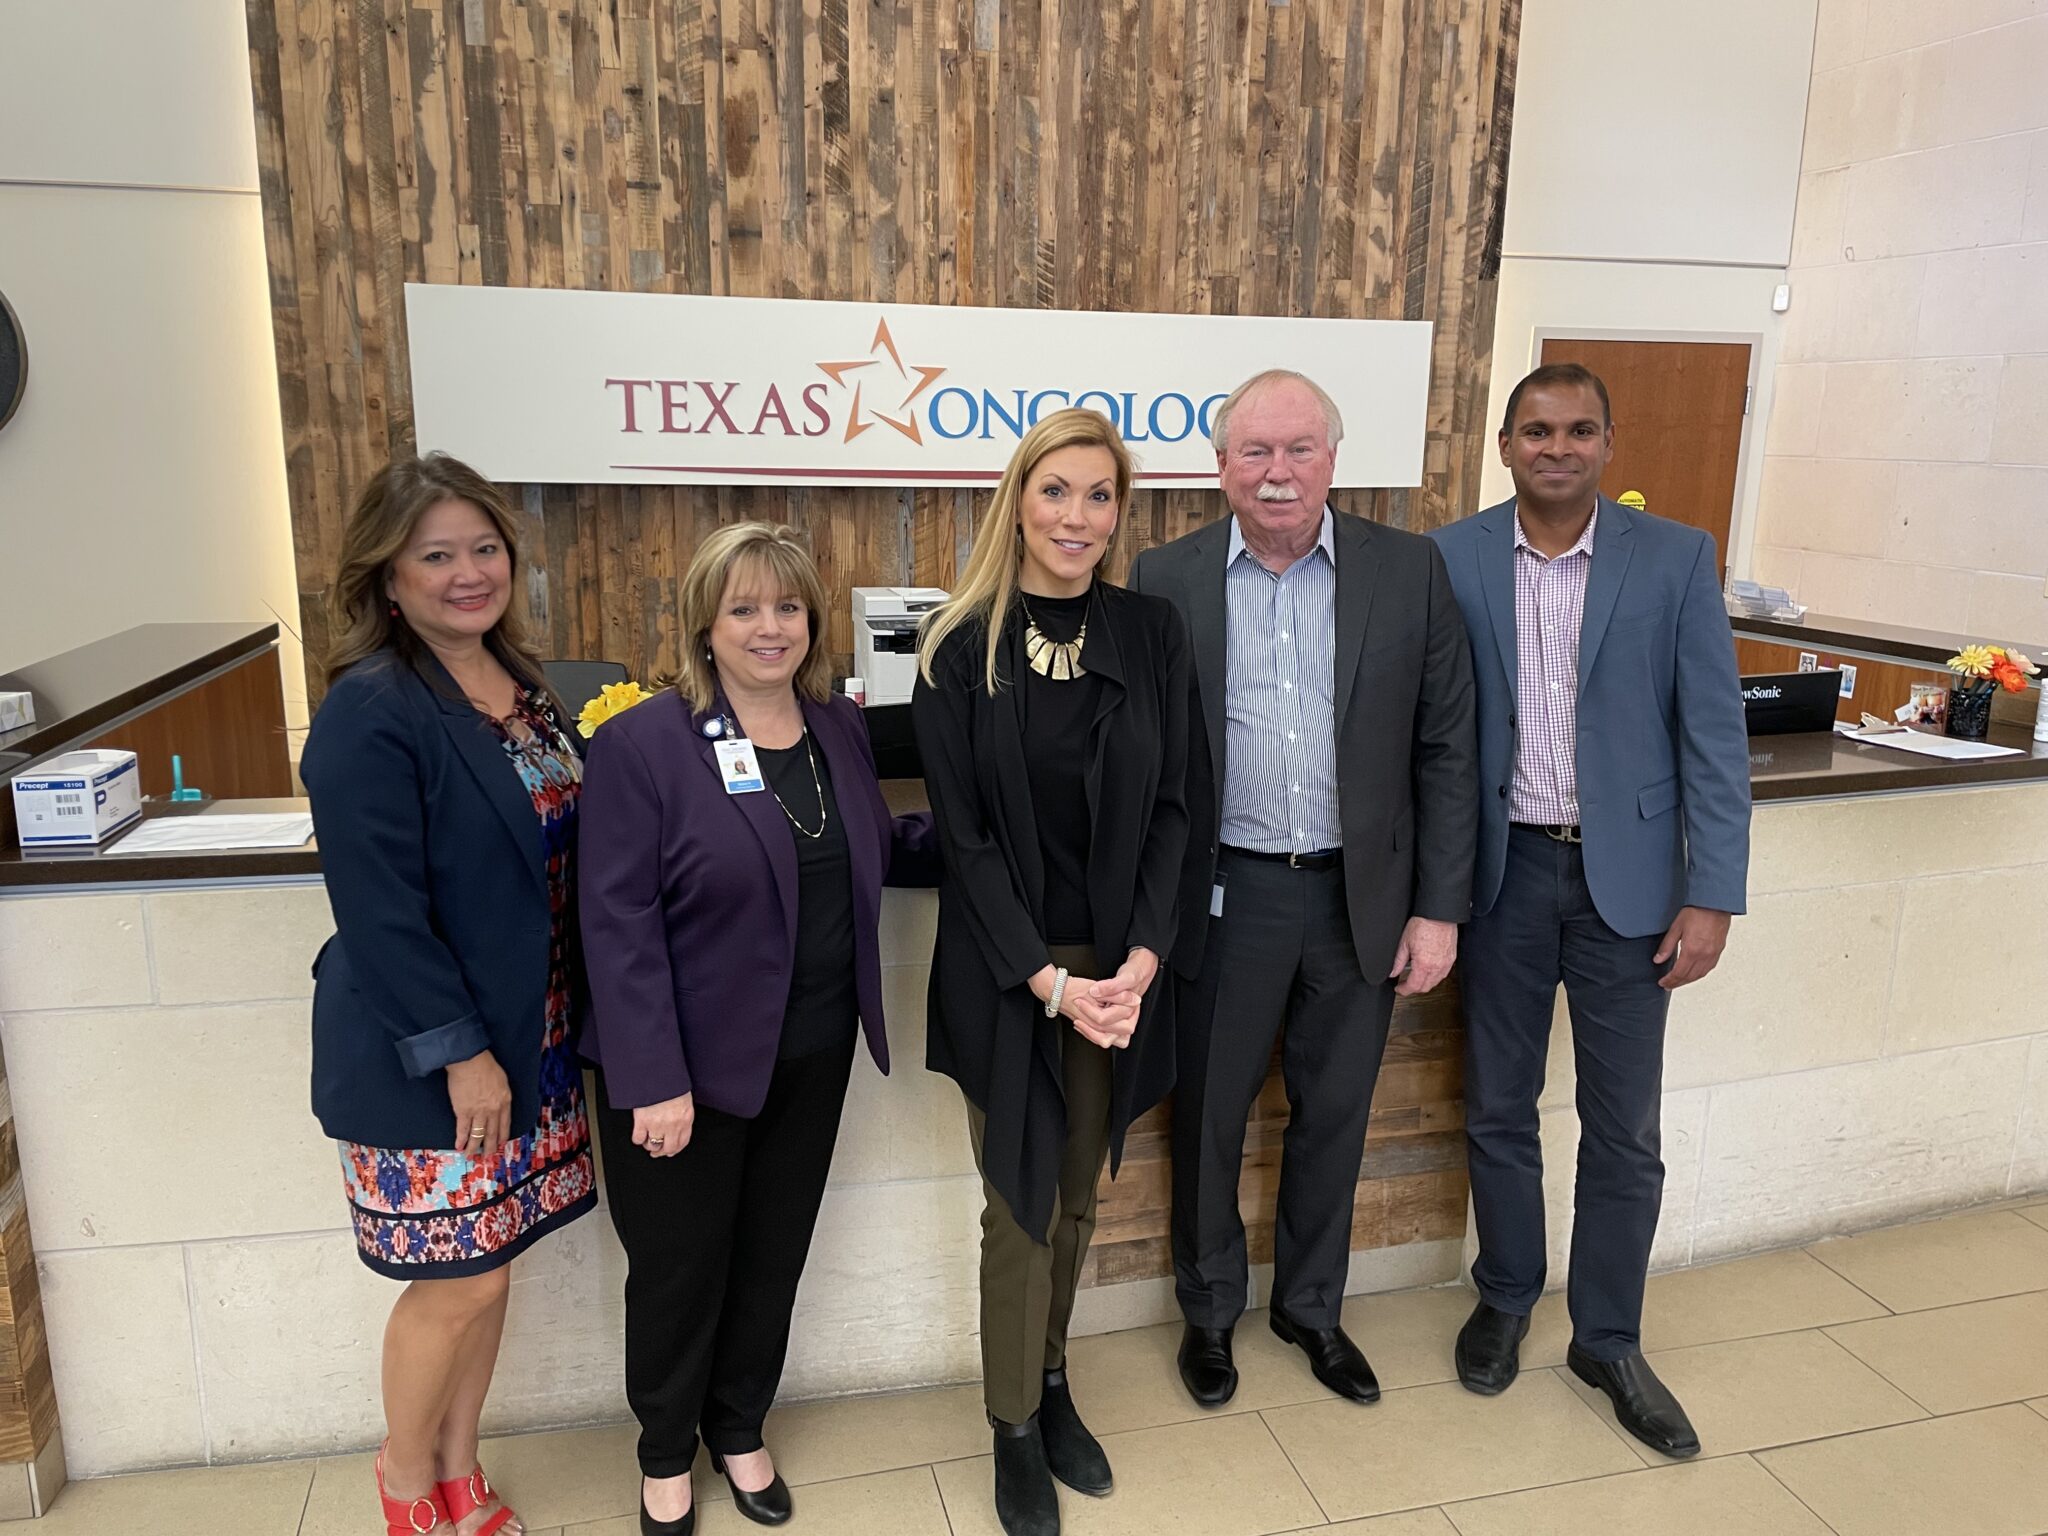 <strong>Texas Oncology Hosts Congresswoman Beth Van Duyne (R-TX)</strong>